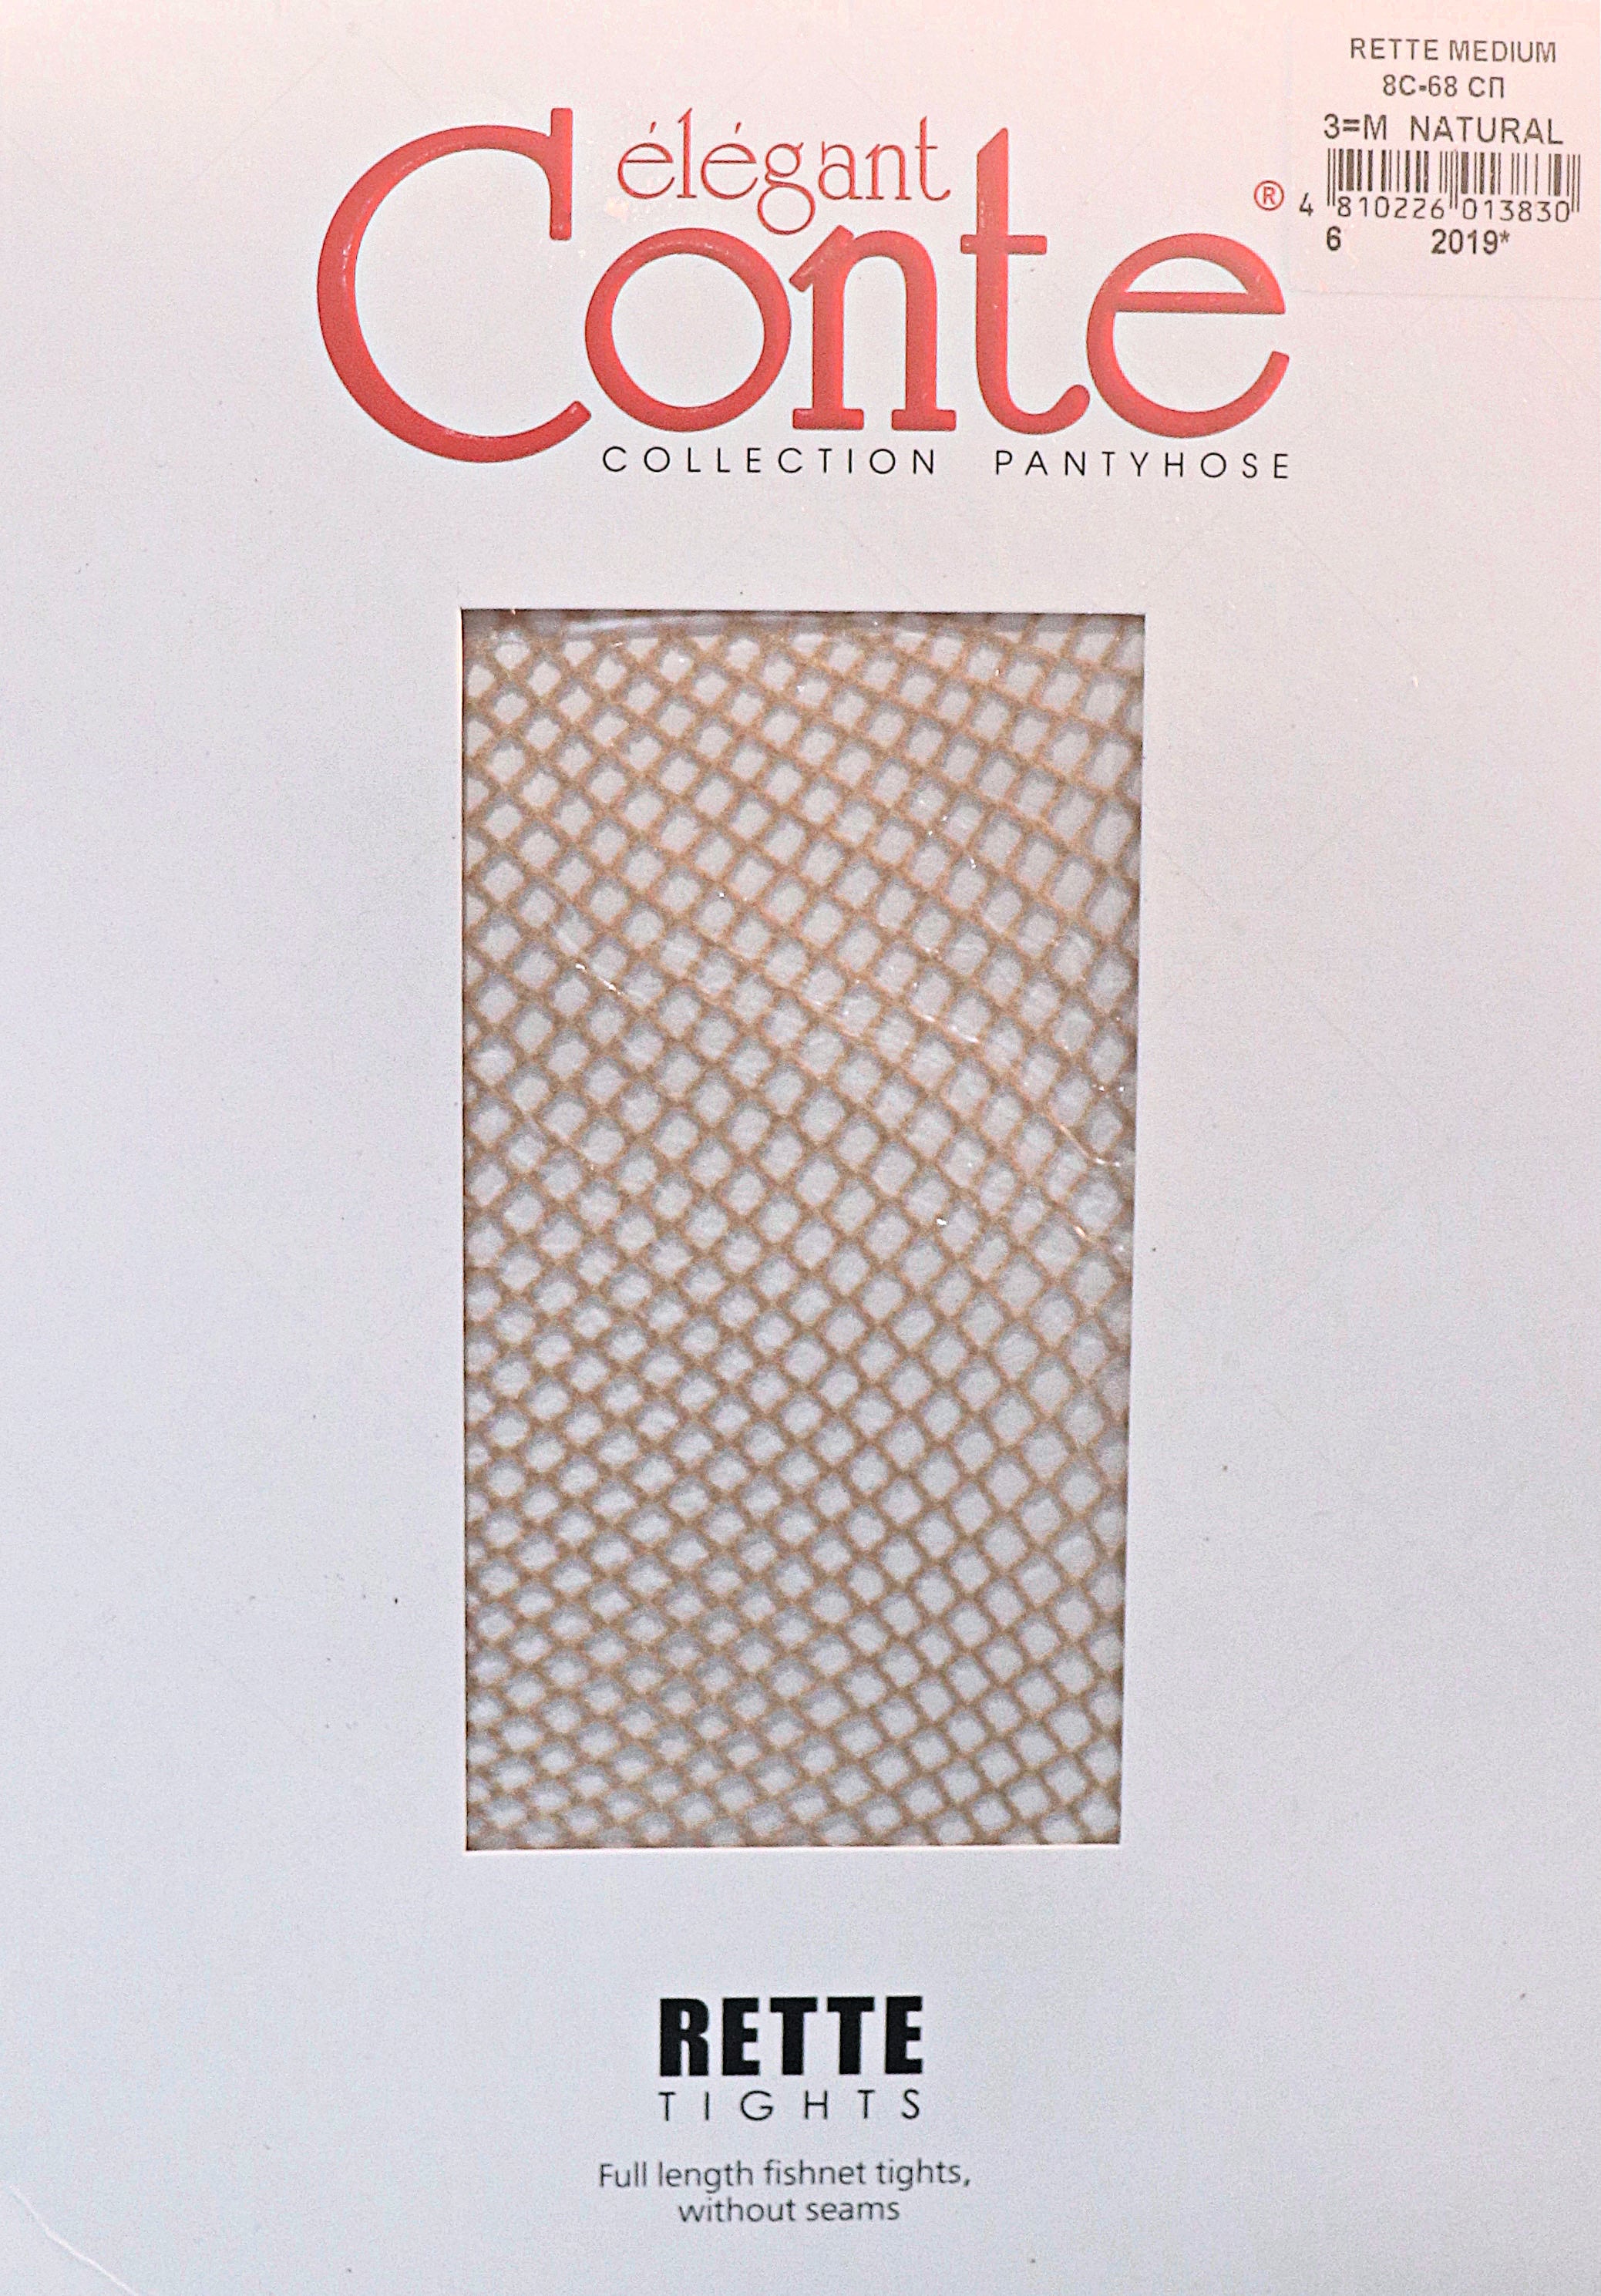 Conte TIGHTS Rette Micro, Fancy Fishnet Sheer Seamless Pantyhose